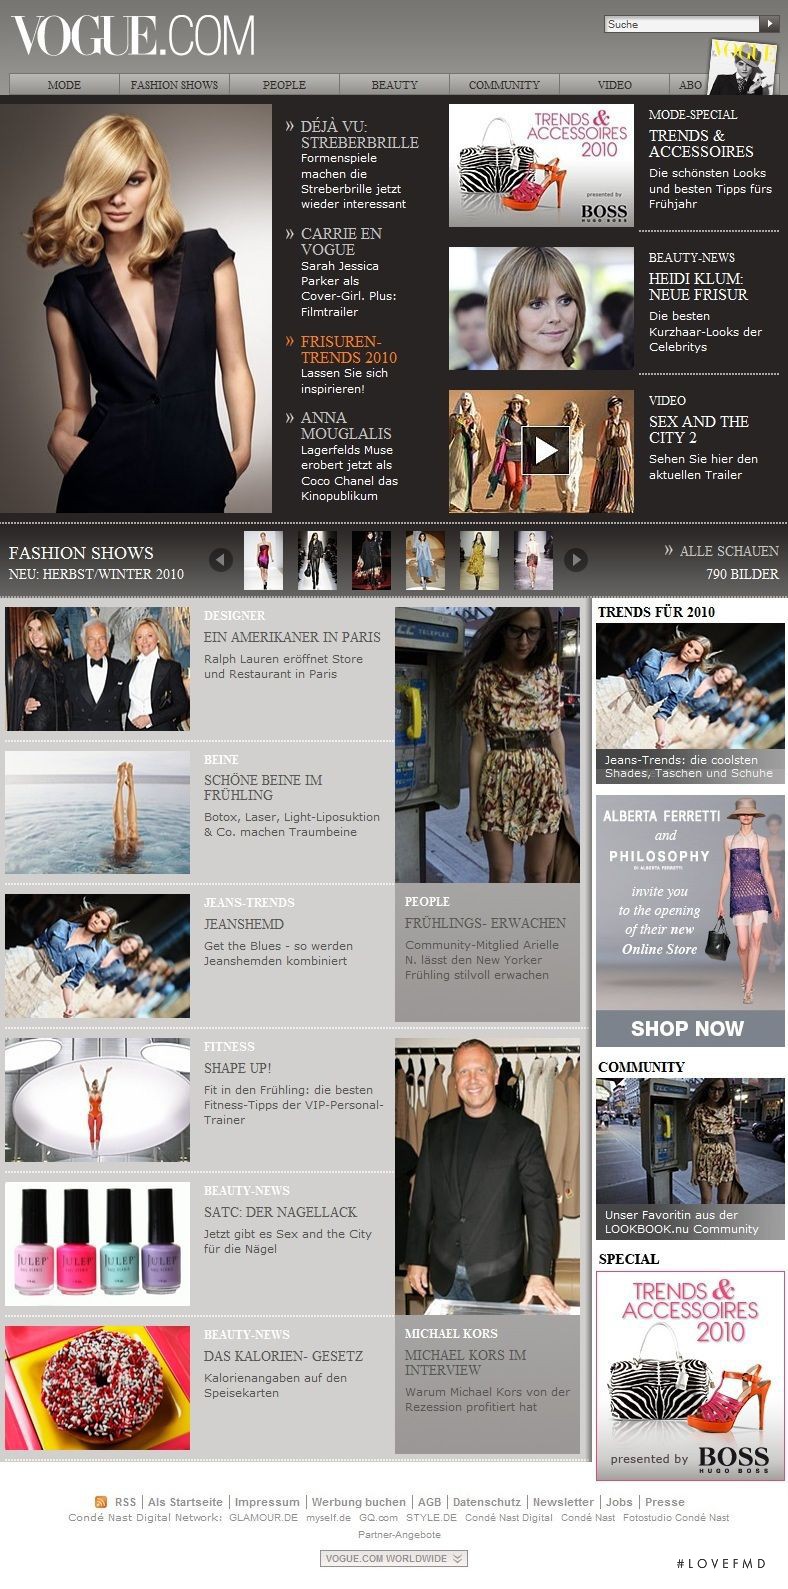  featured on the Vogue.com screen from April 2010